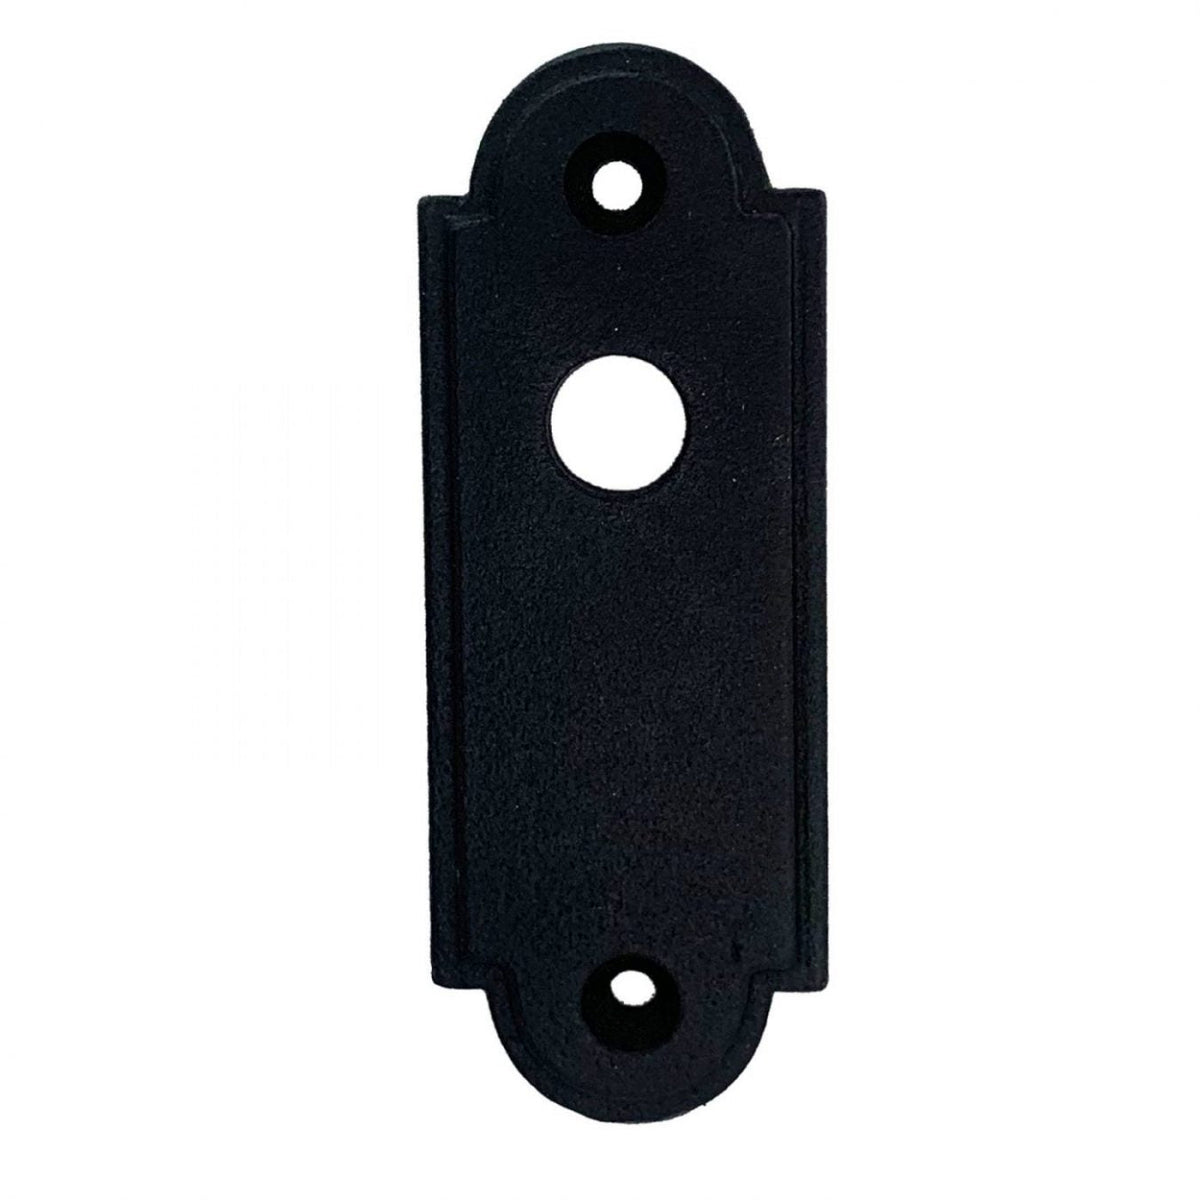 Lag Pintle Trim Plate - 3-1/4&quot; Inch x 1-1/4&quot; Inch - Black Powder Coat Finish - Sold Individually